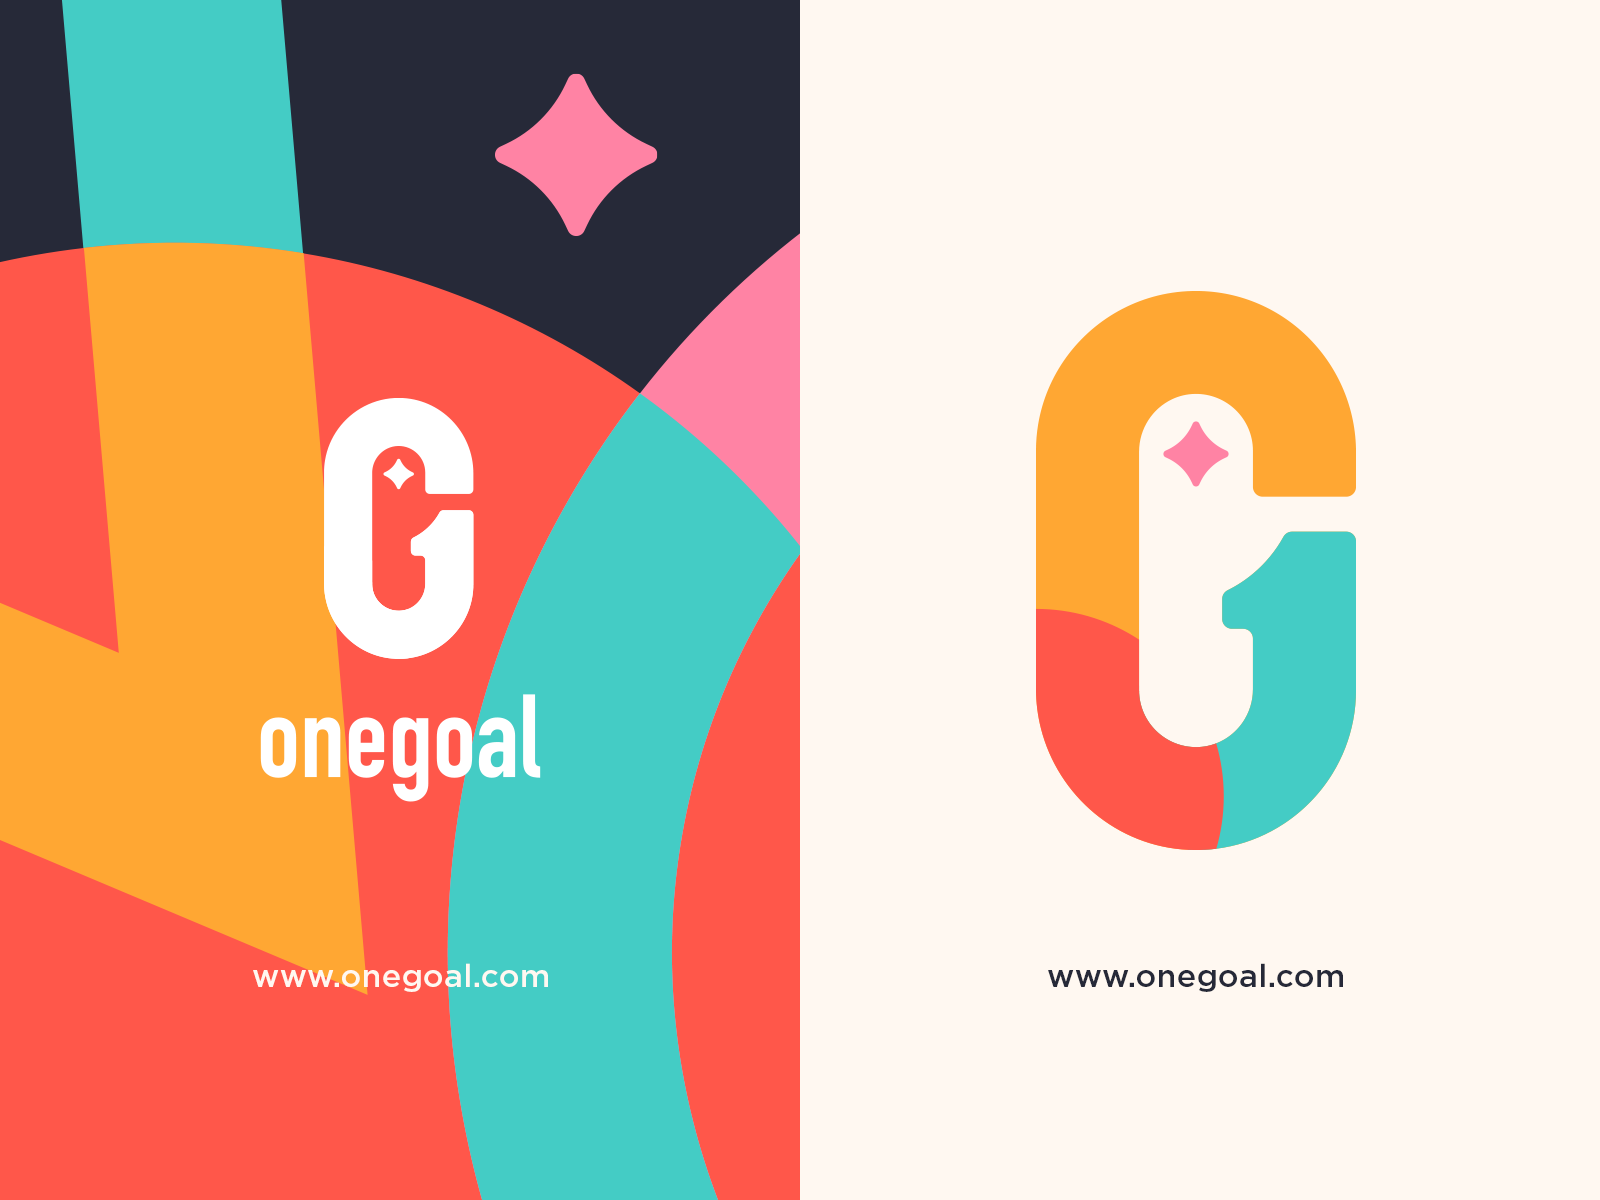 Is It Time to Talk More About onegoal?